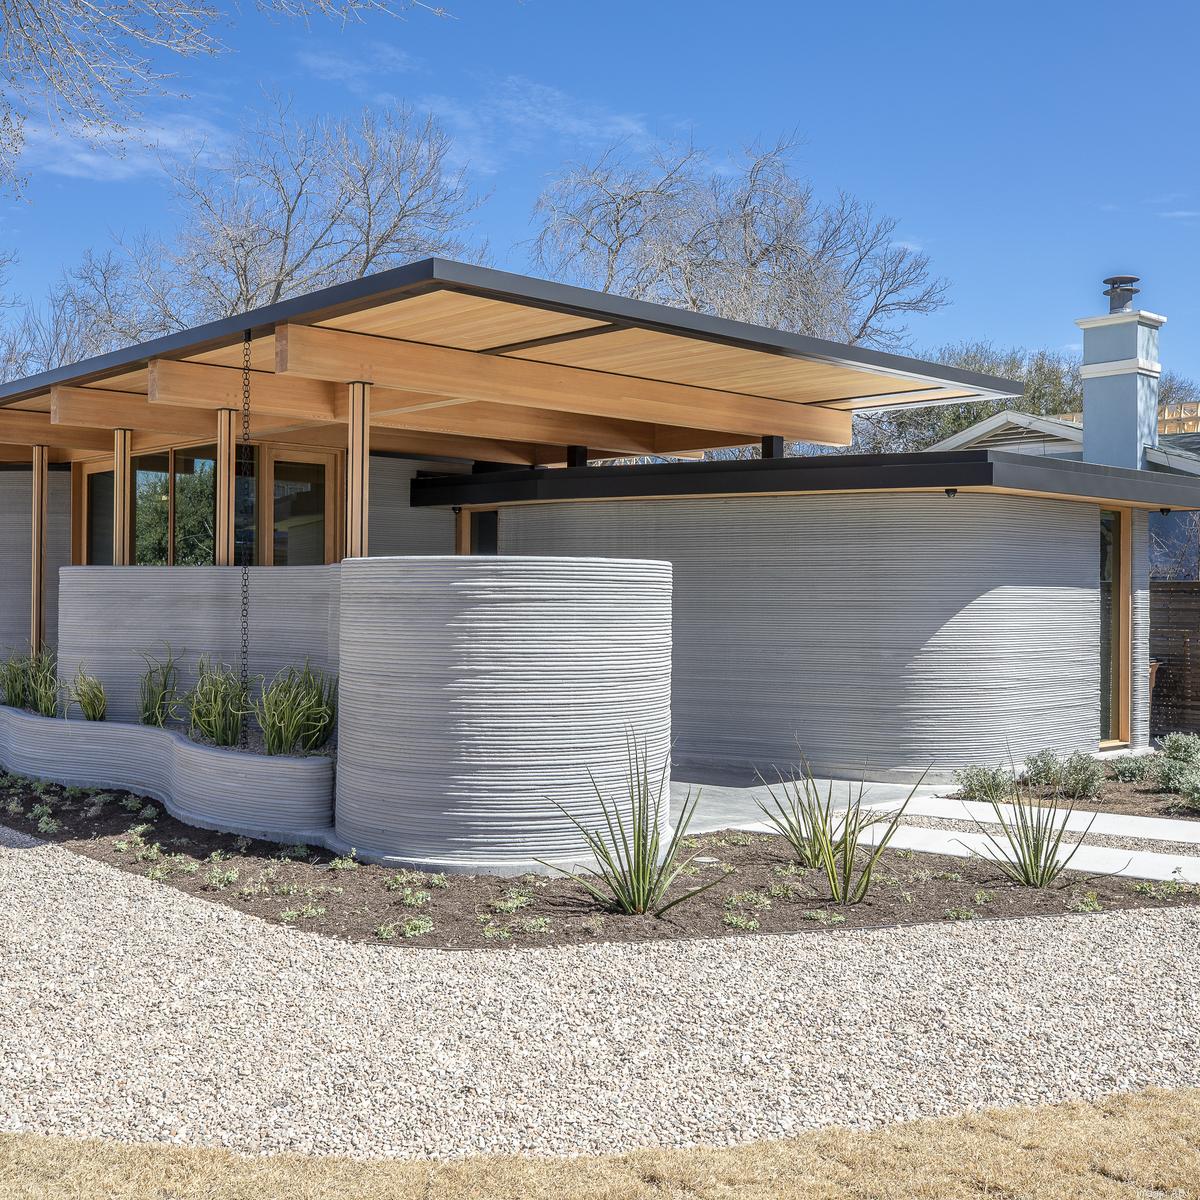 Austin Inno 3D-printed homes startup Icon enacts 'small' of